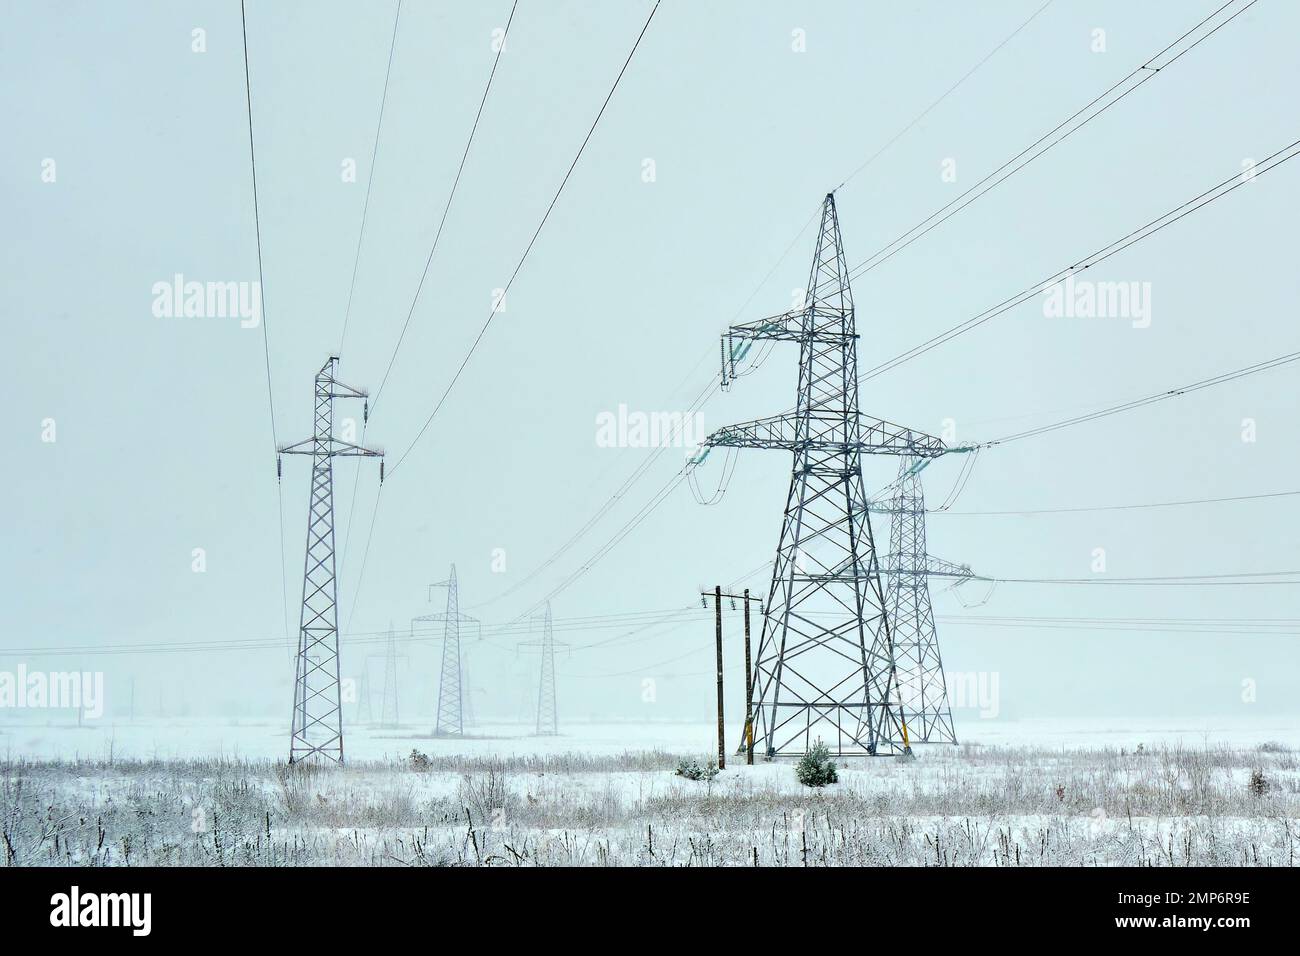 power line for industrial power transmission passing through the field electricity wires megawatts metal tower construction Stock Photo